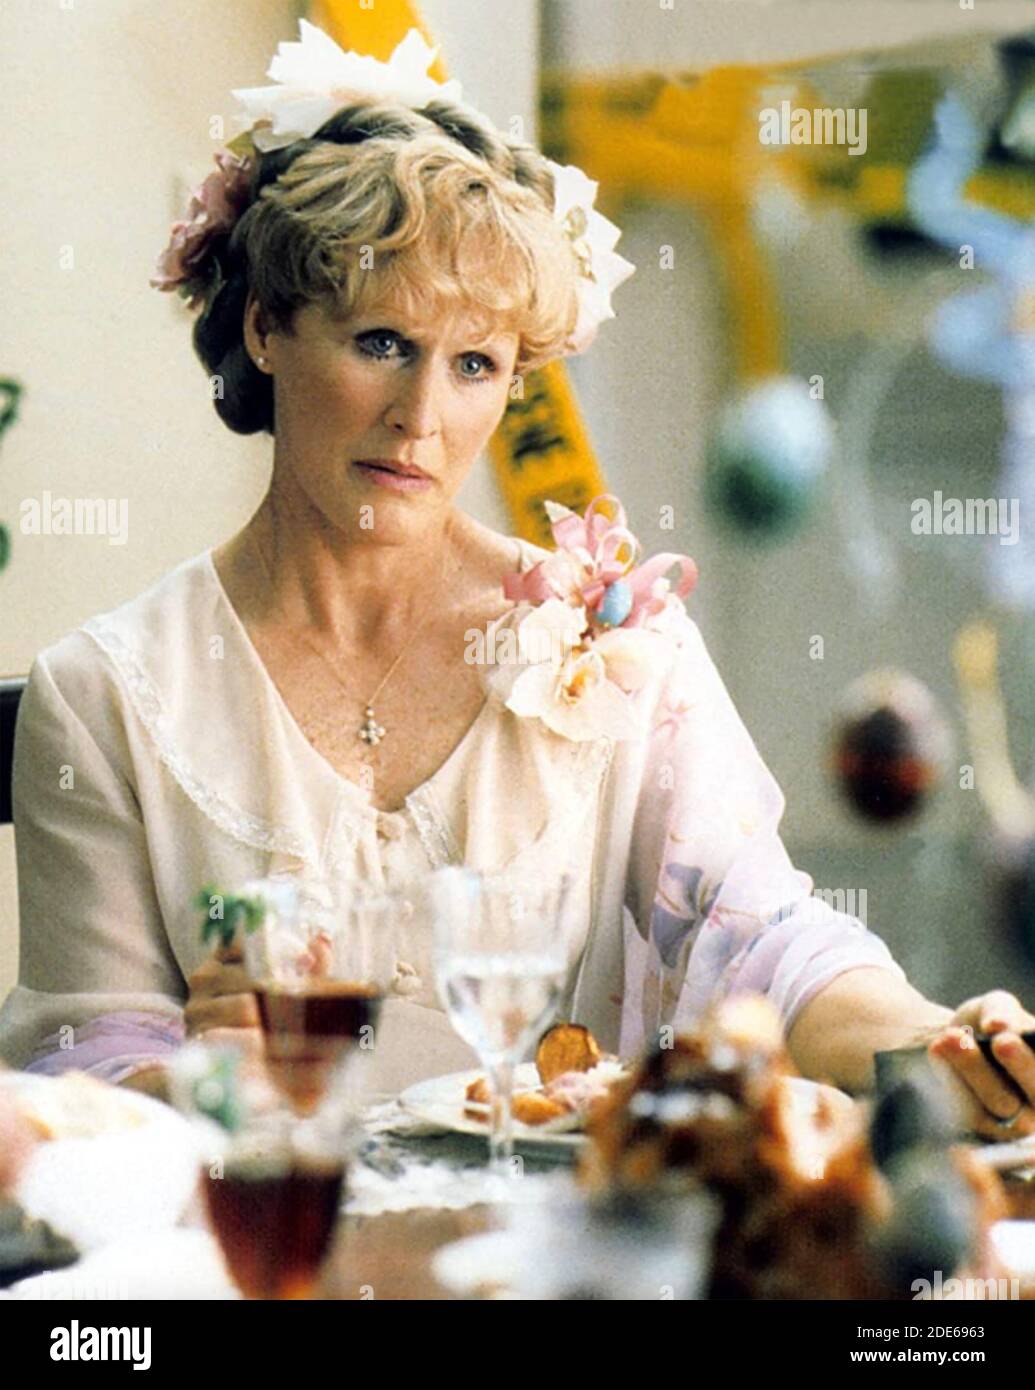 COOKIE'S FORTUNE 1999 October Films production with Glen Close Stock Photo